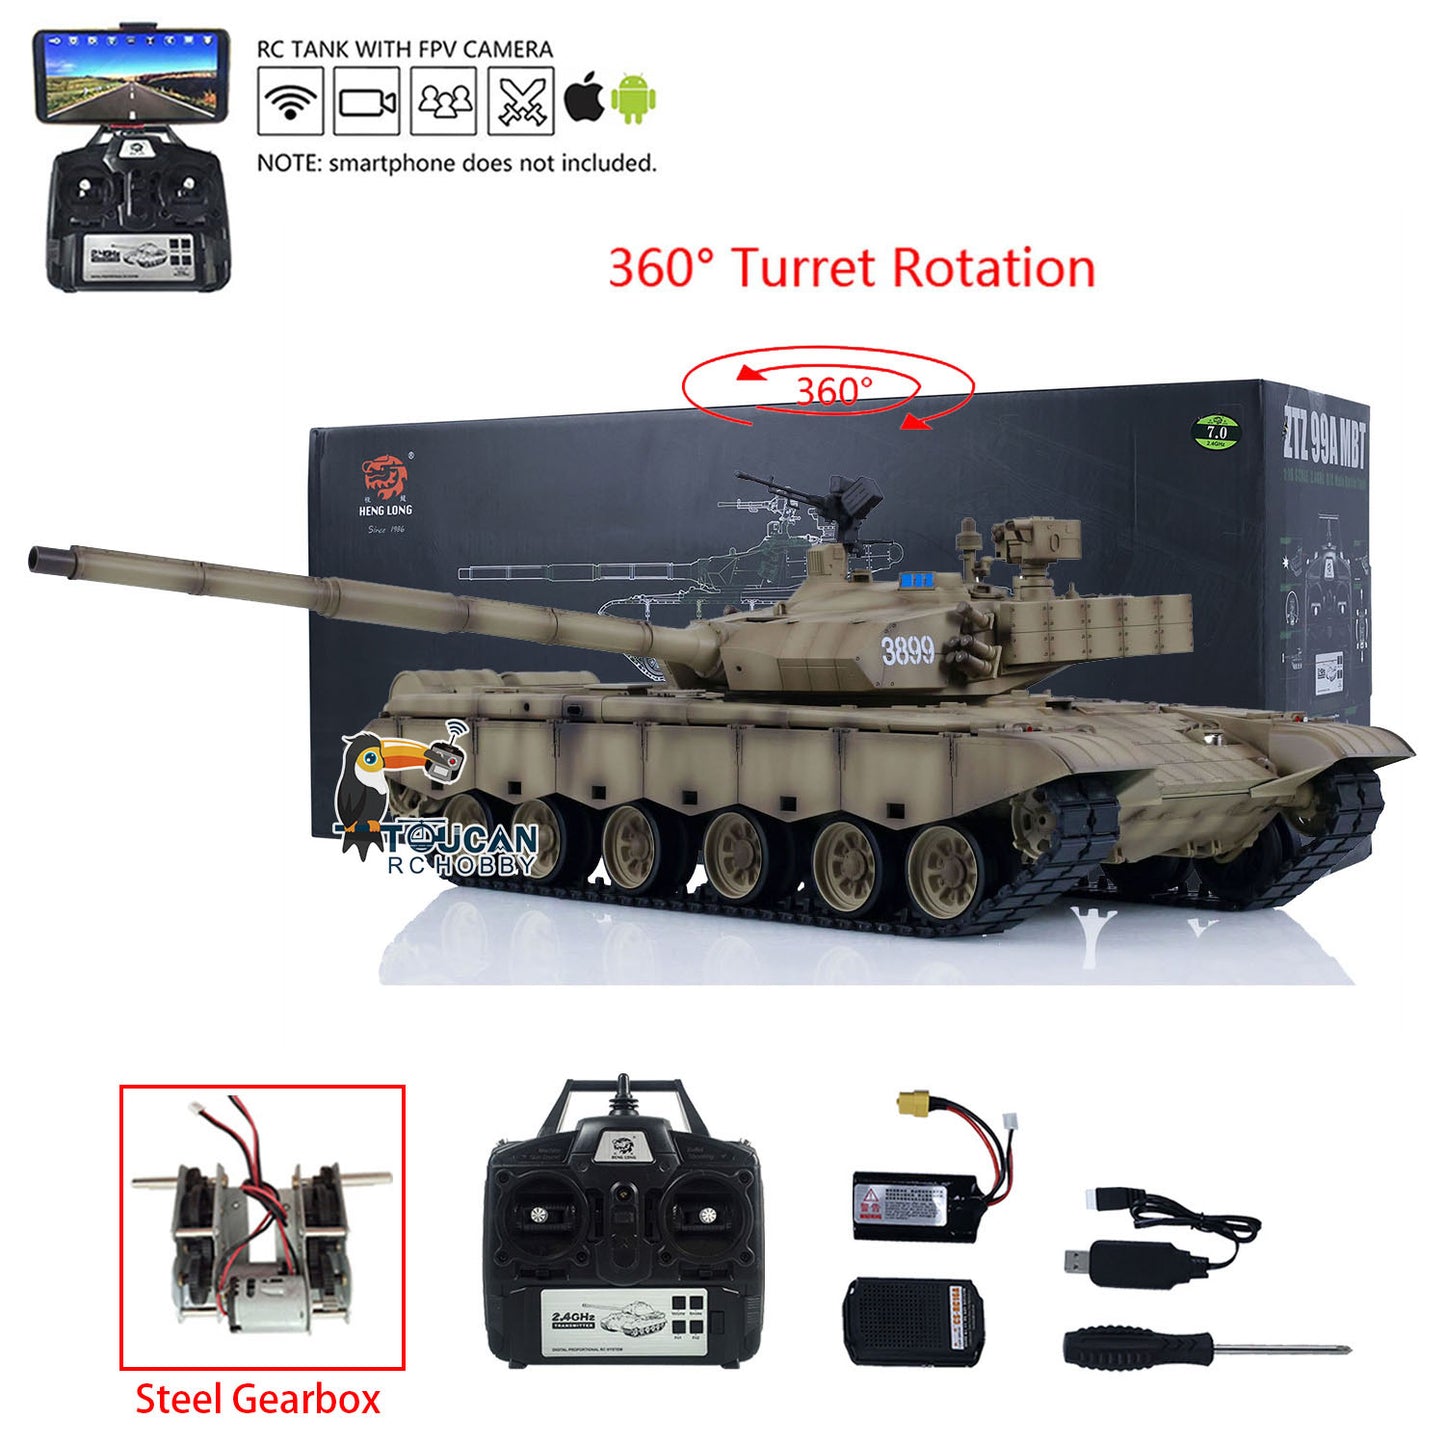 Henglong 1/16 FPV 7.0 Chinese 99A RC Tank 3899A 360 Turret Steel Gearbox Radio Controlled Military Vehicle Hobby Model DIY Toy Car